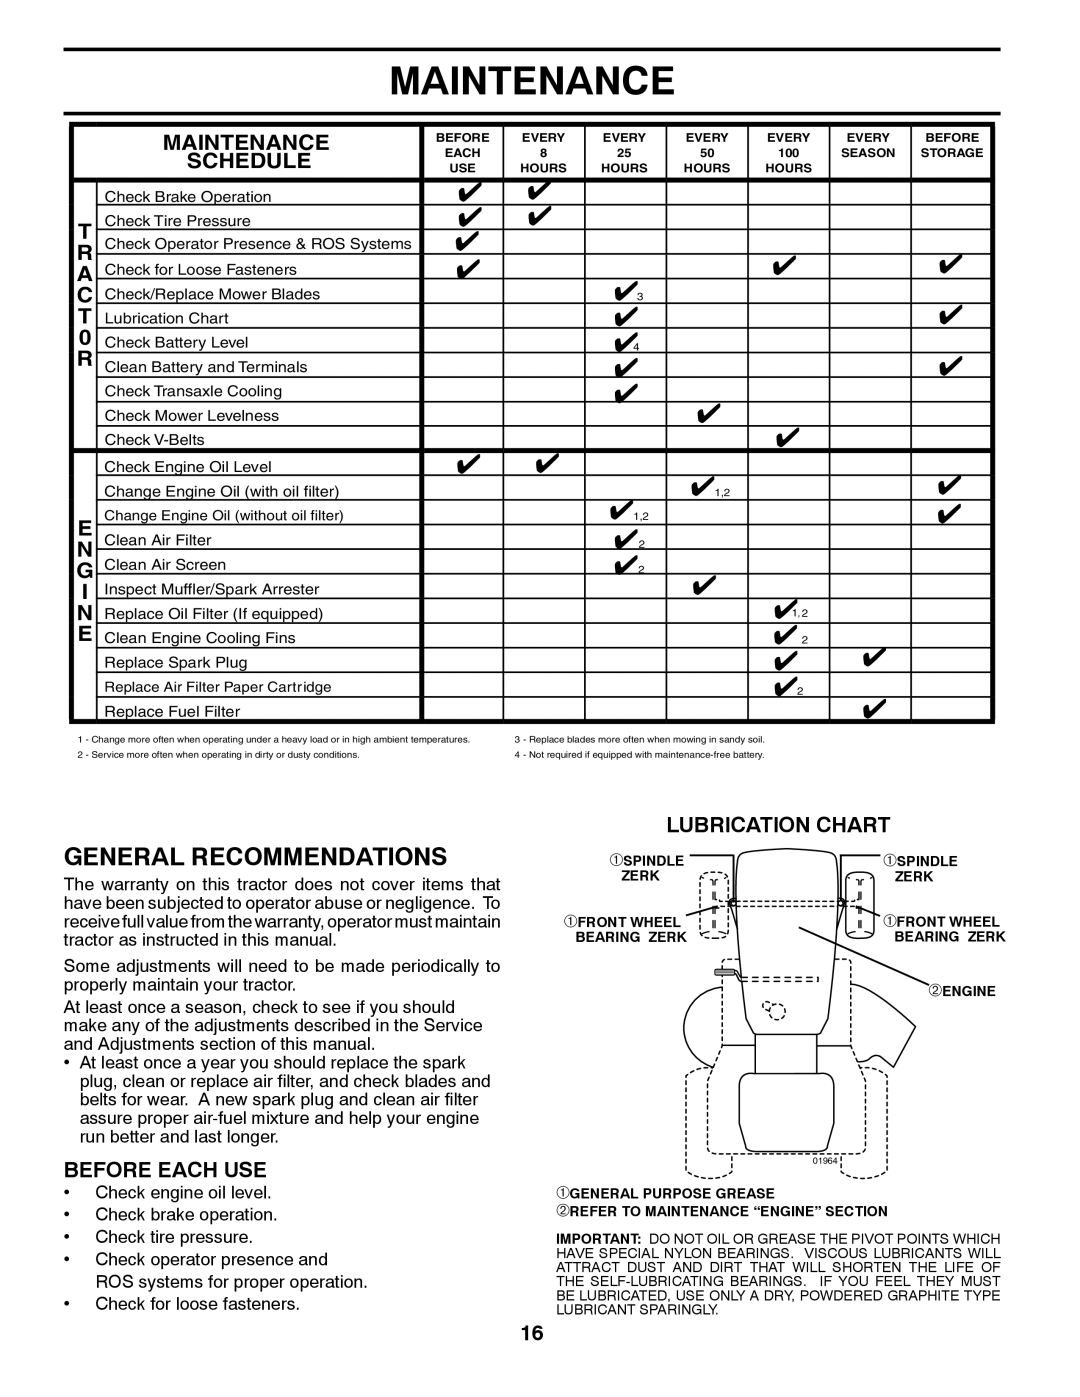 Jonsered LT2218A manual Maintenance, General Recommendations, Schedule, Lubrication Chart, Before Each Use 